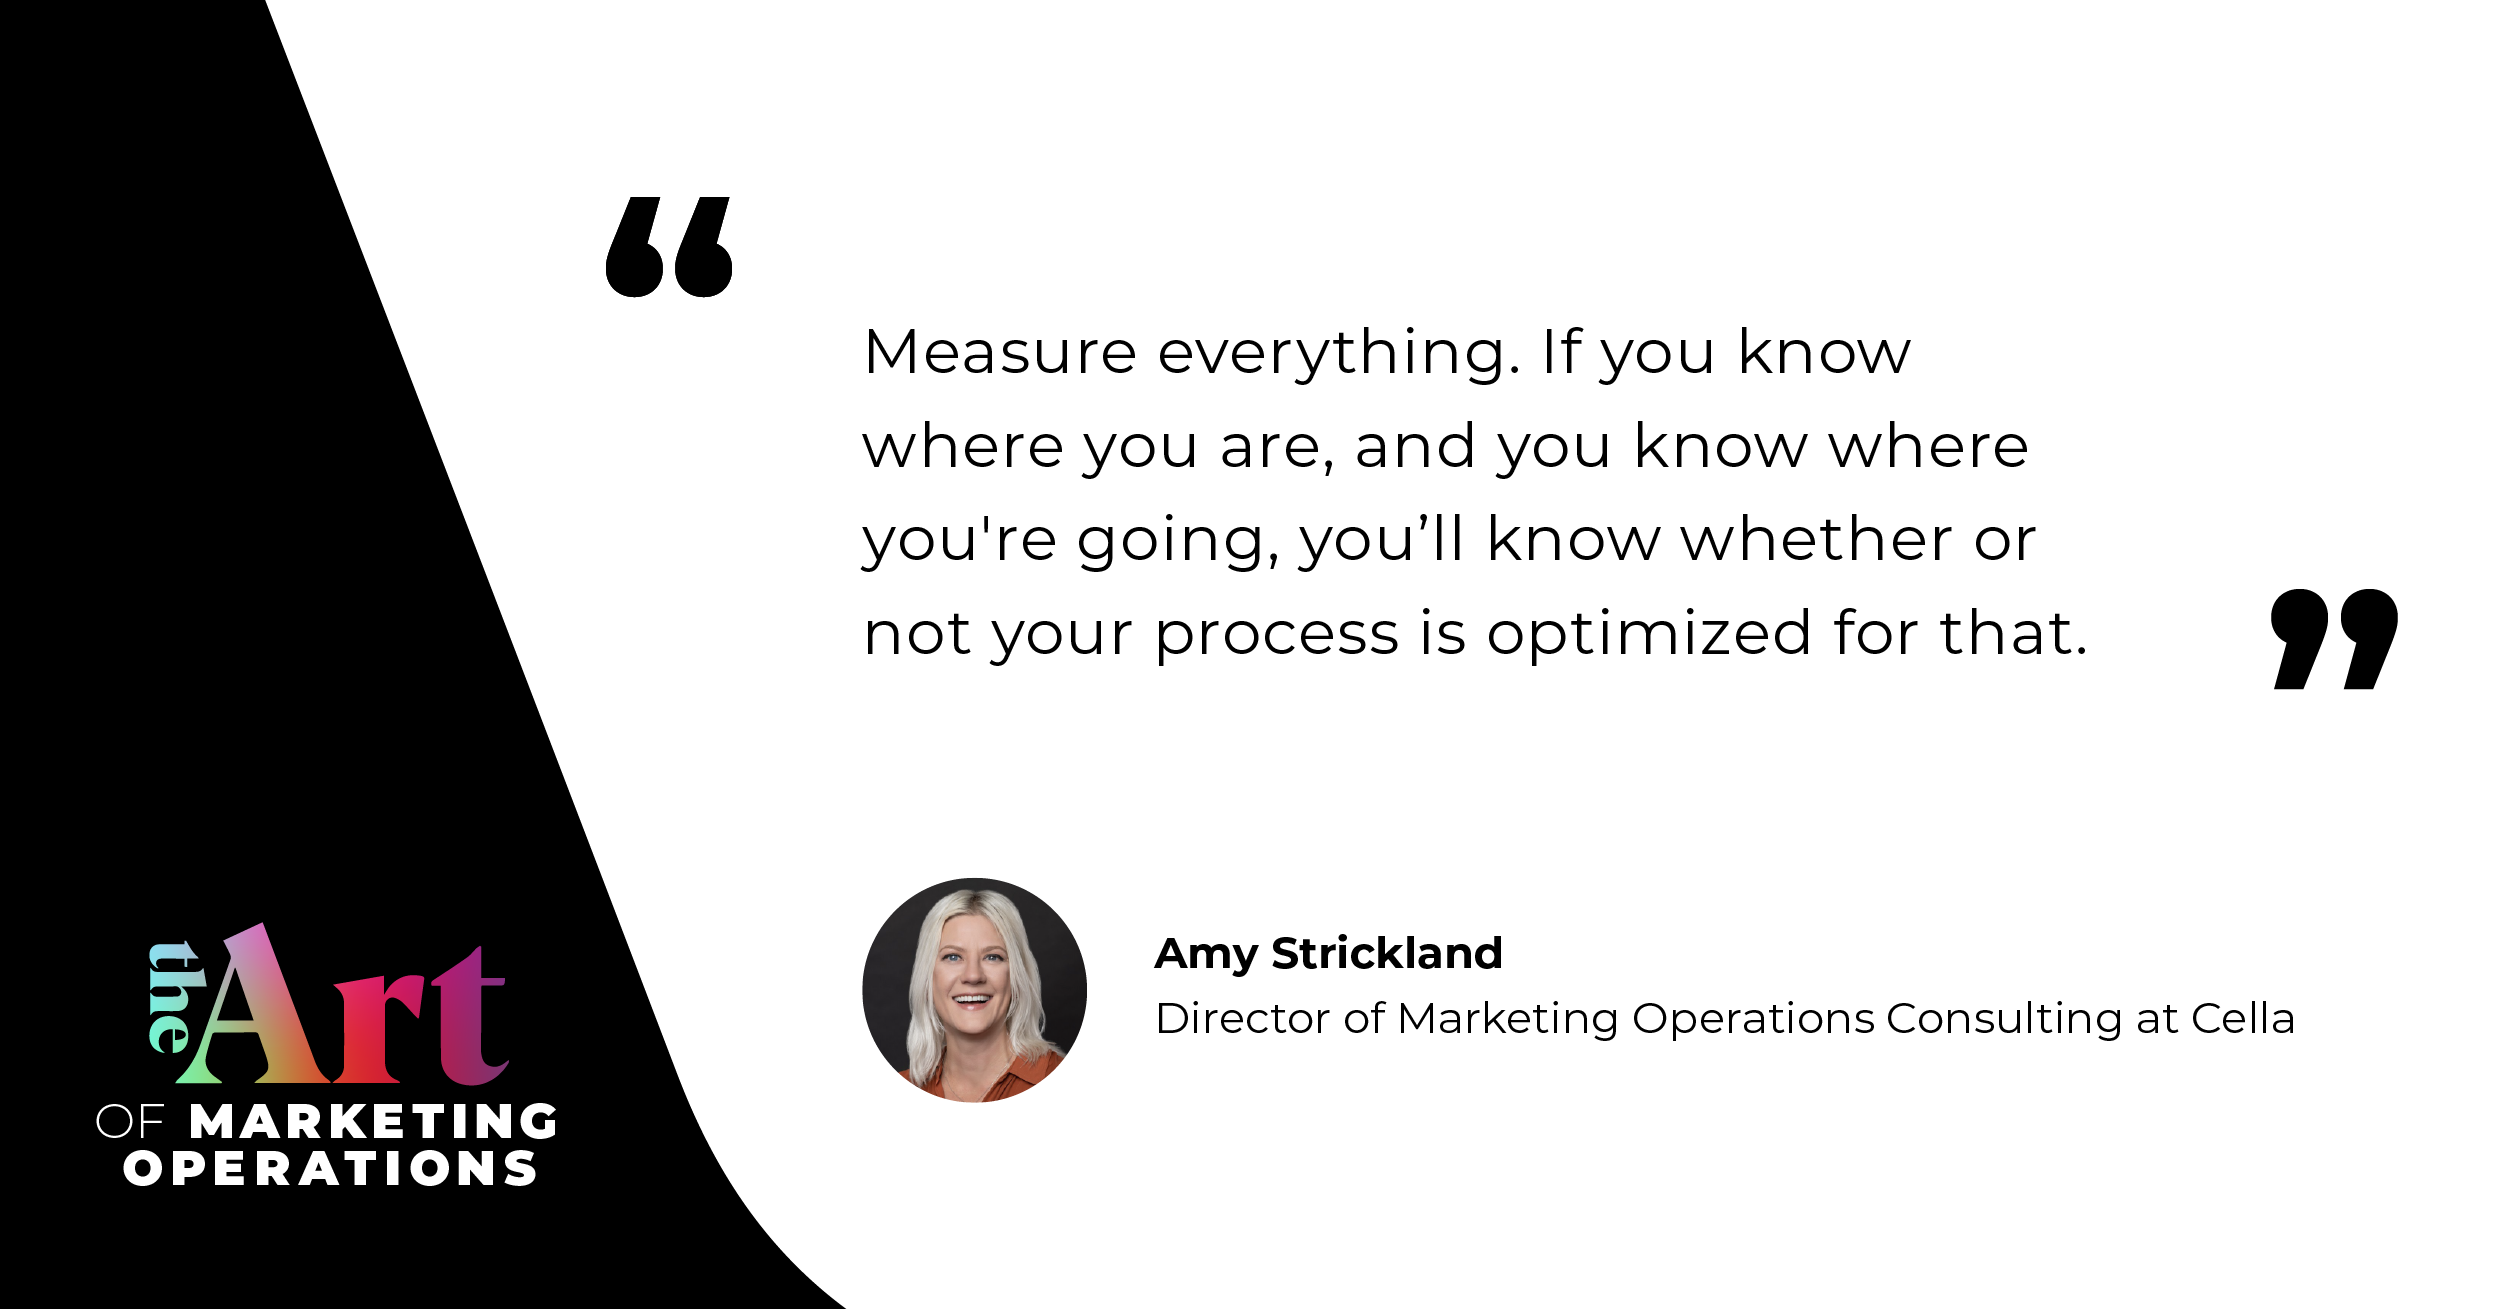 “Measure everything. If you know where you are, and you know where you're going, you'll know whether or not your process is optimized for that.” — Amy Strickland